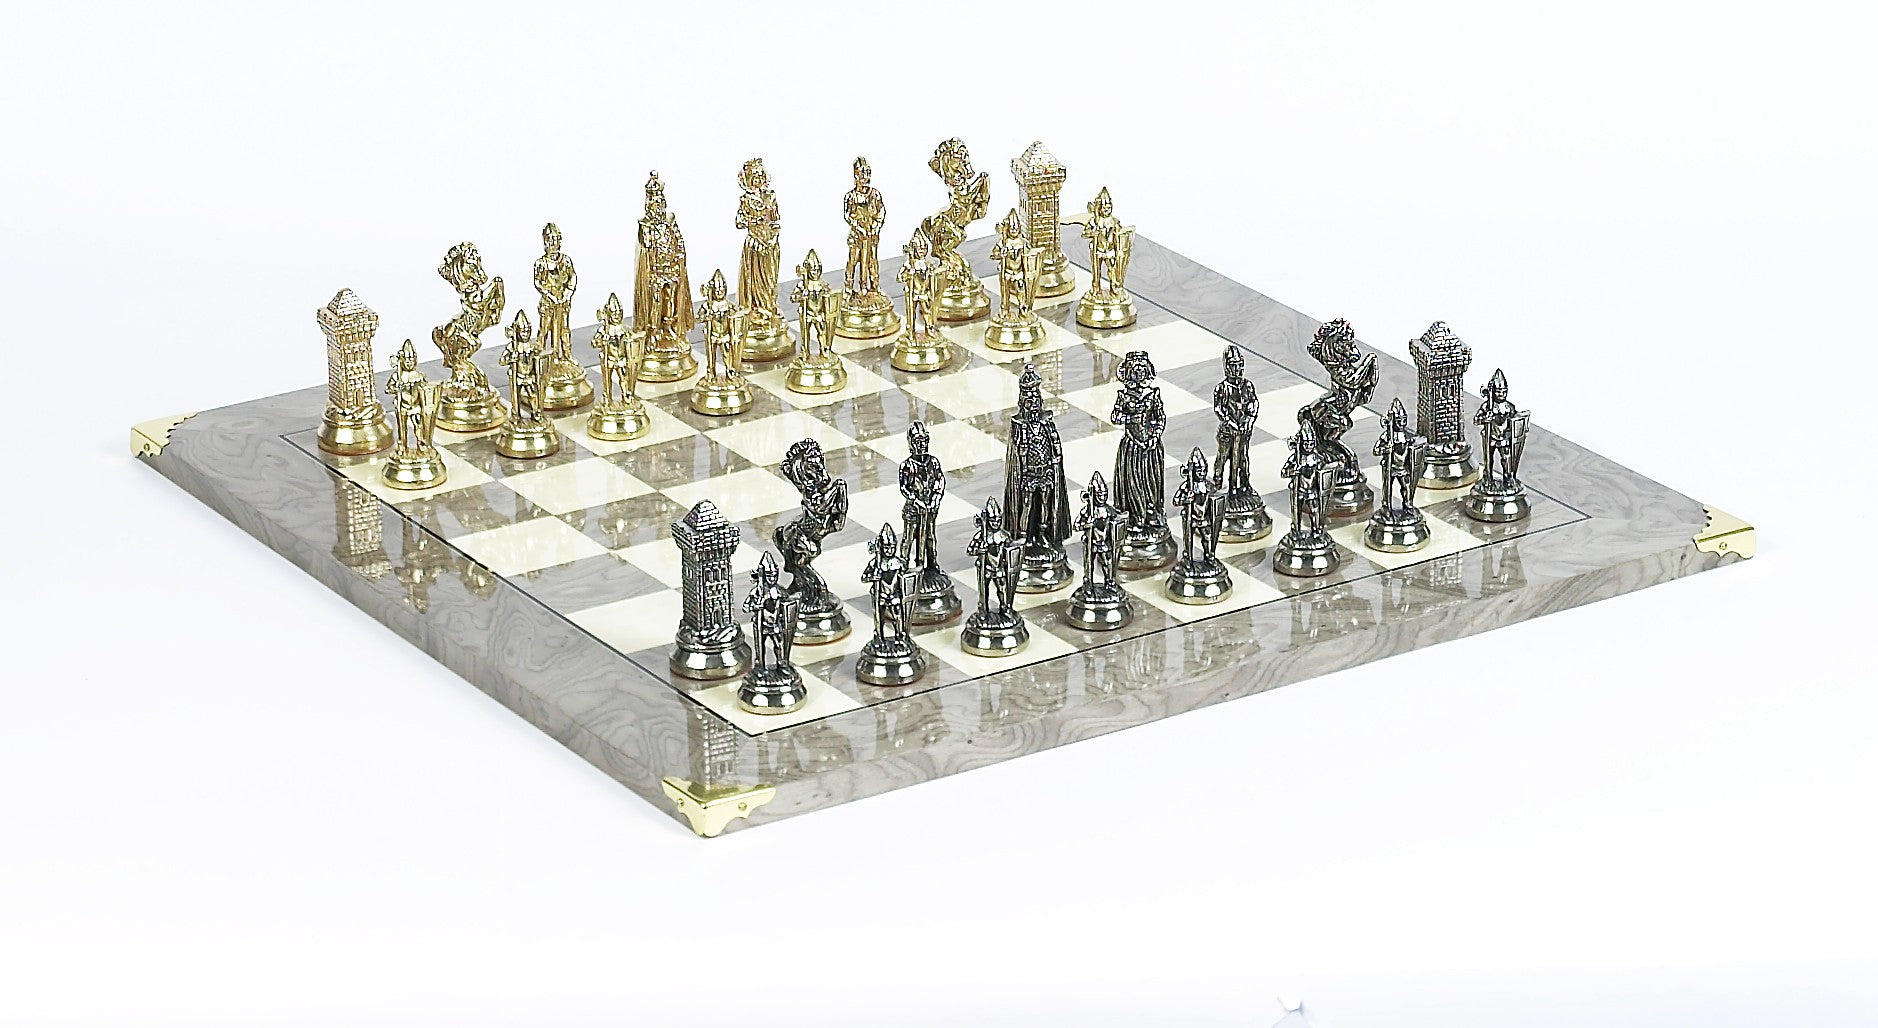 Reclaimed Auto Part Chess Set (Elevated) –